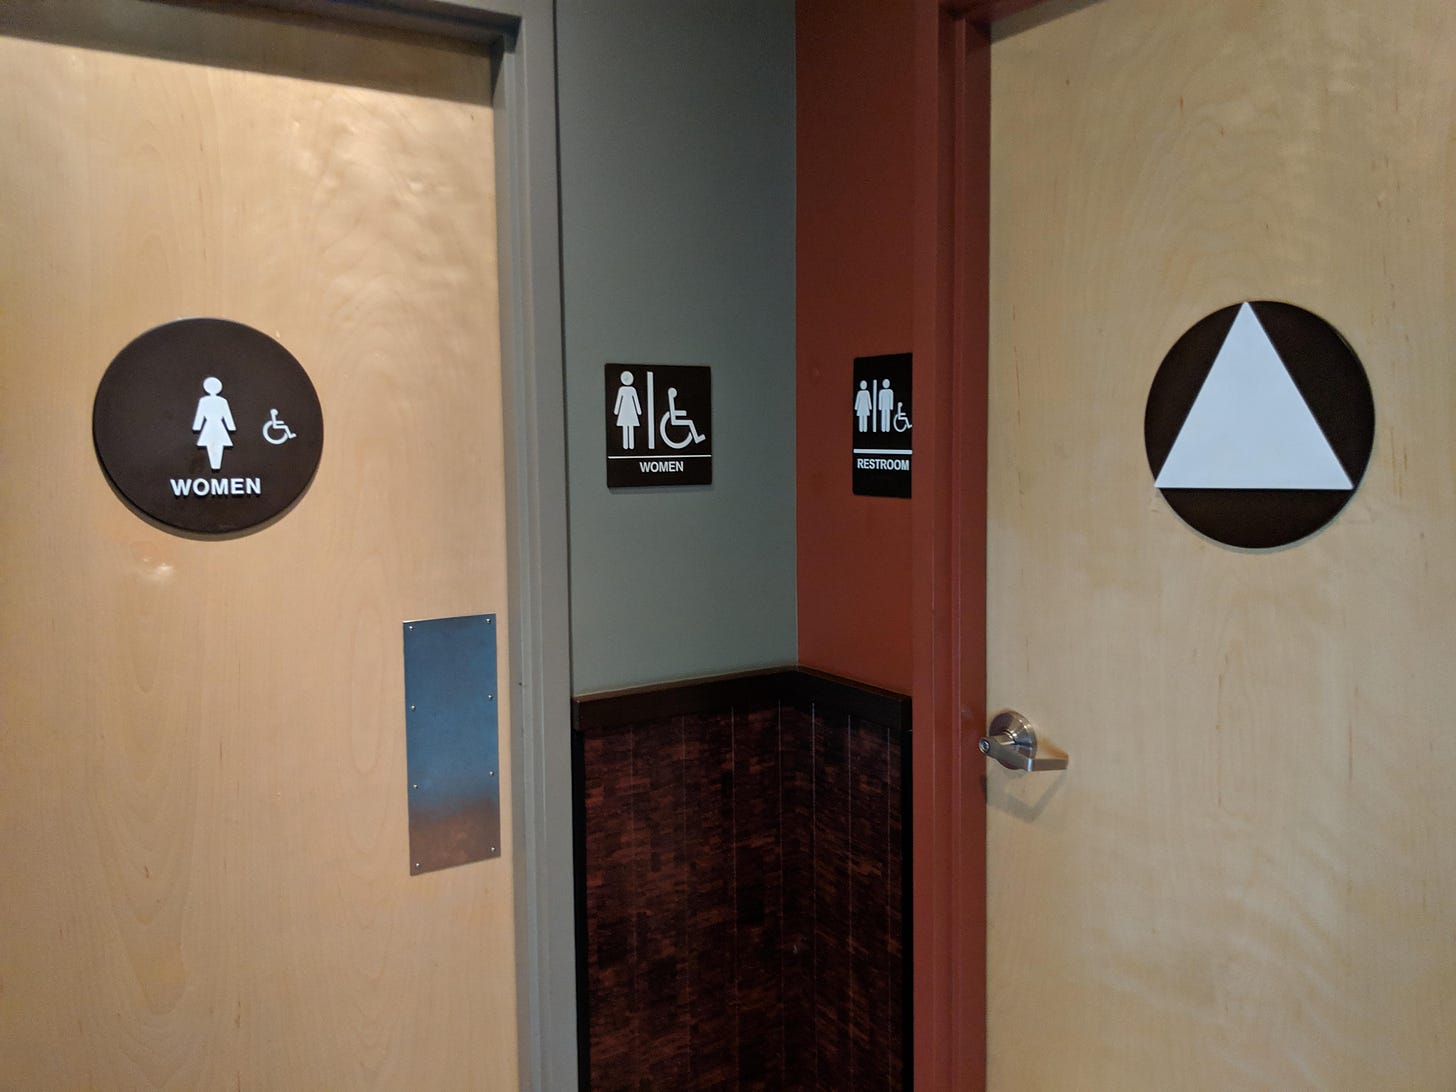 Women get to use both restrooms + the women's restroom is bigger (no lock). Seems equal ...